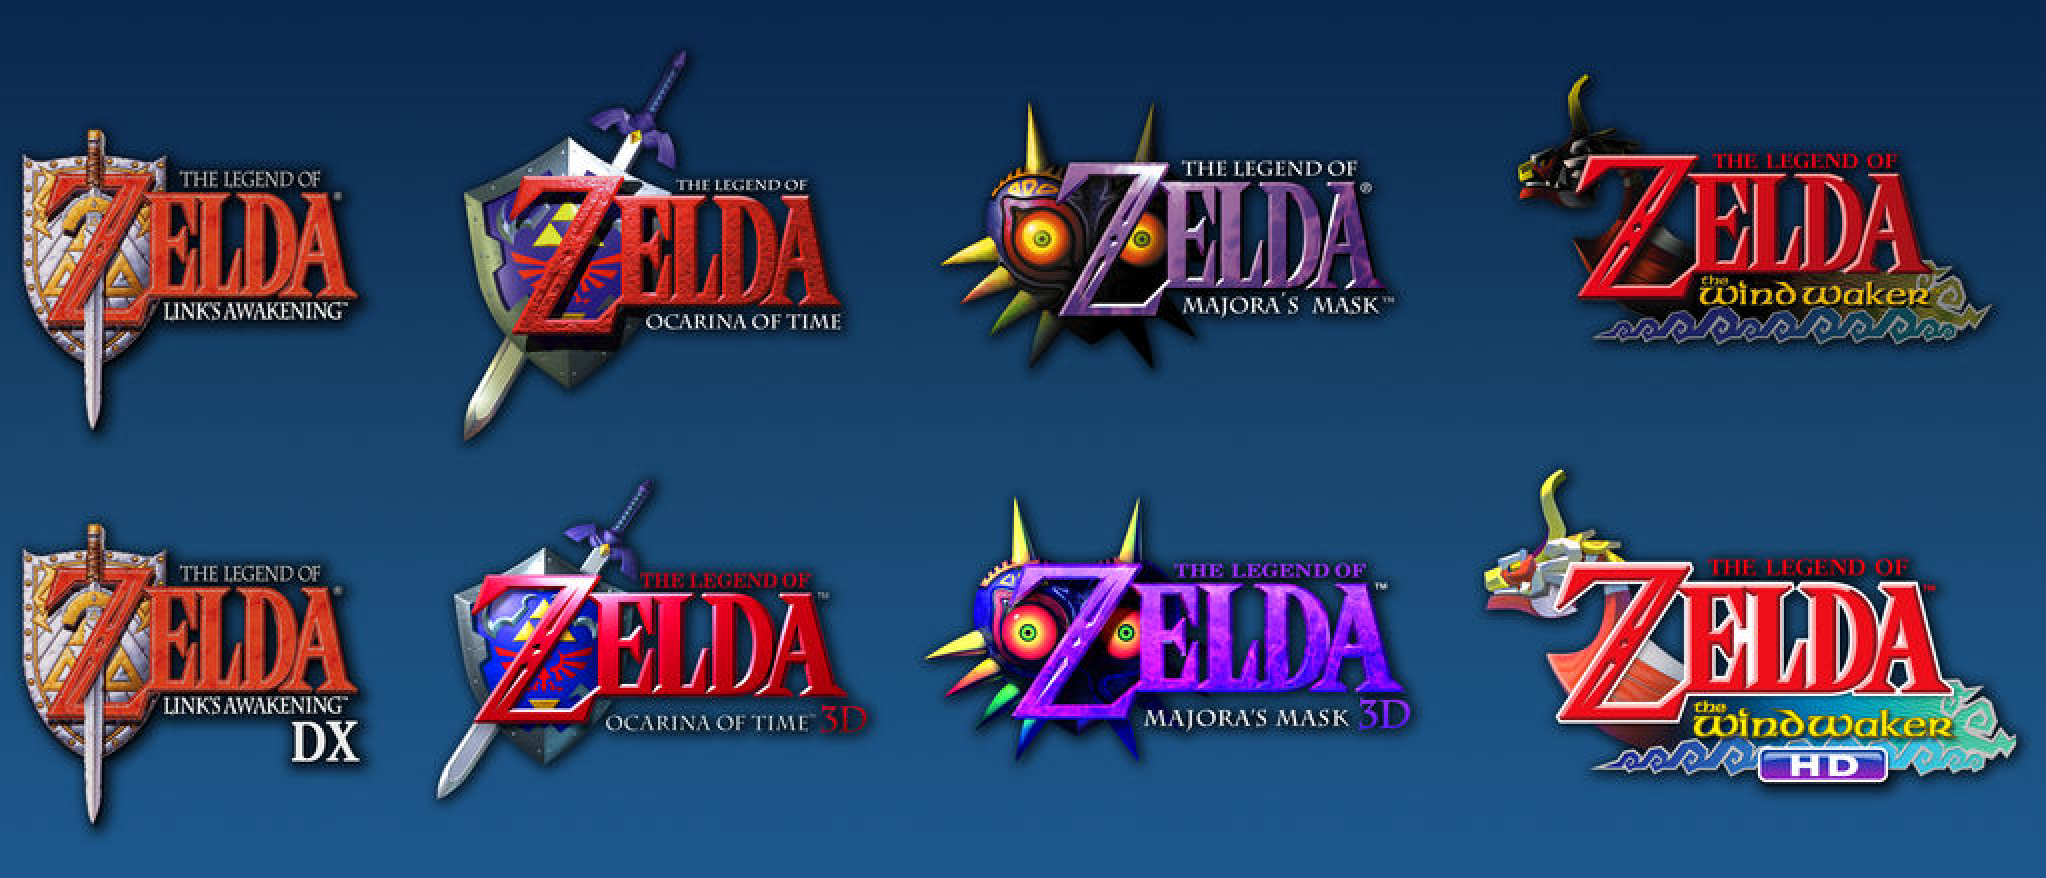 SS] I Was Messing Around with 3D Models from Different Zelda Games